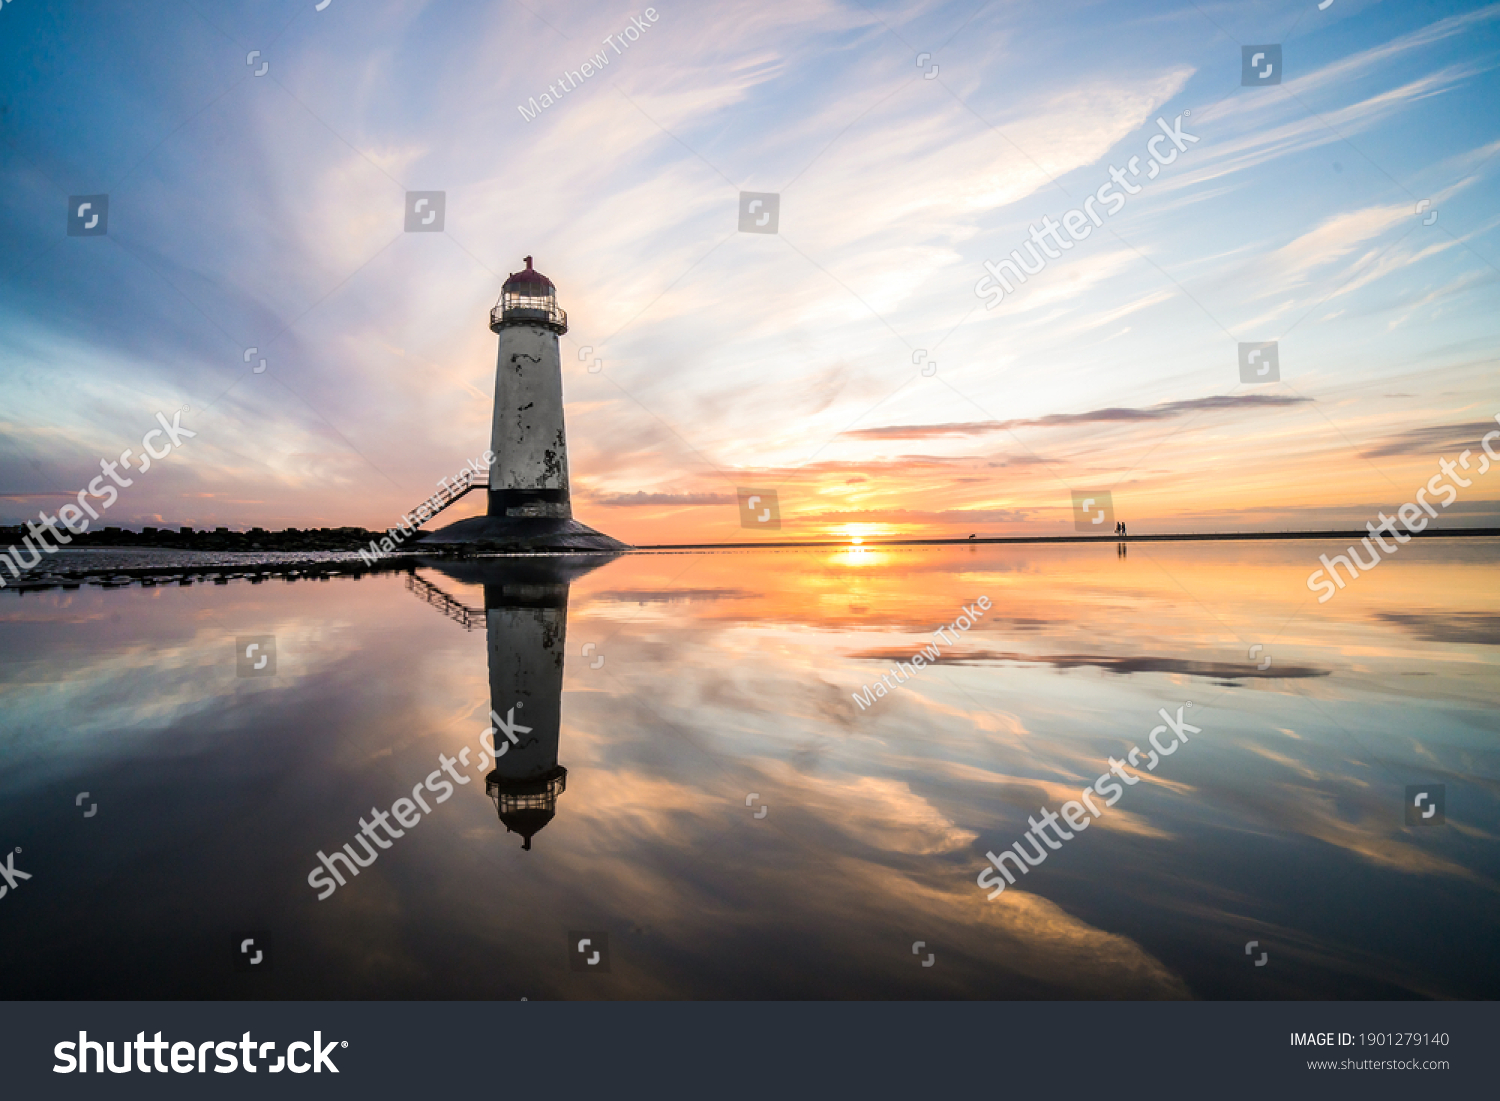 Lighthouse standing in pool of water stunning sunset sunrise reflection reflected in water and sea steps up to building north Wales seashore sand beach still water orange glow golden hour blue hour #1901279140